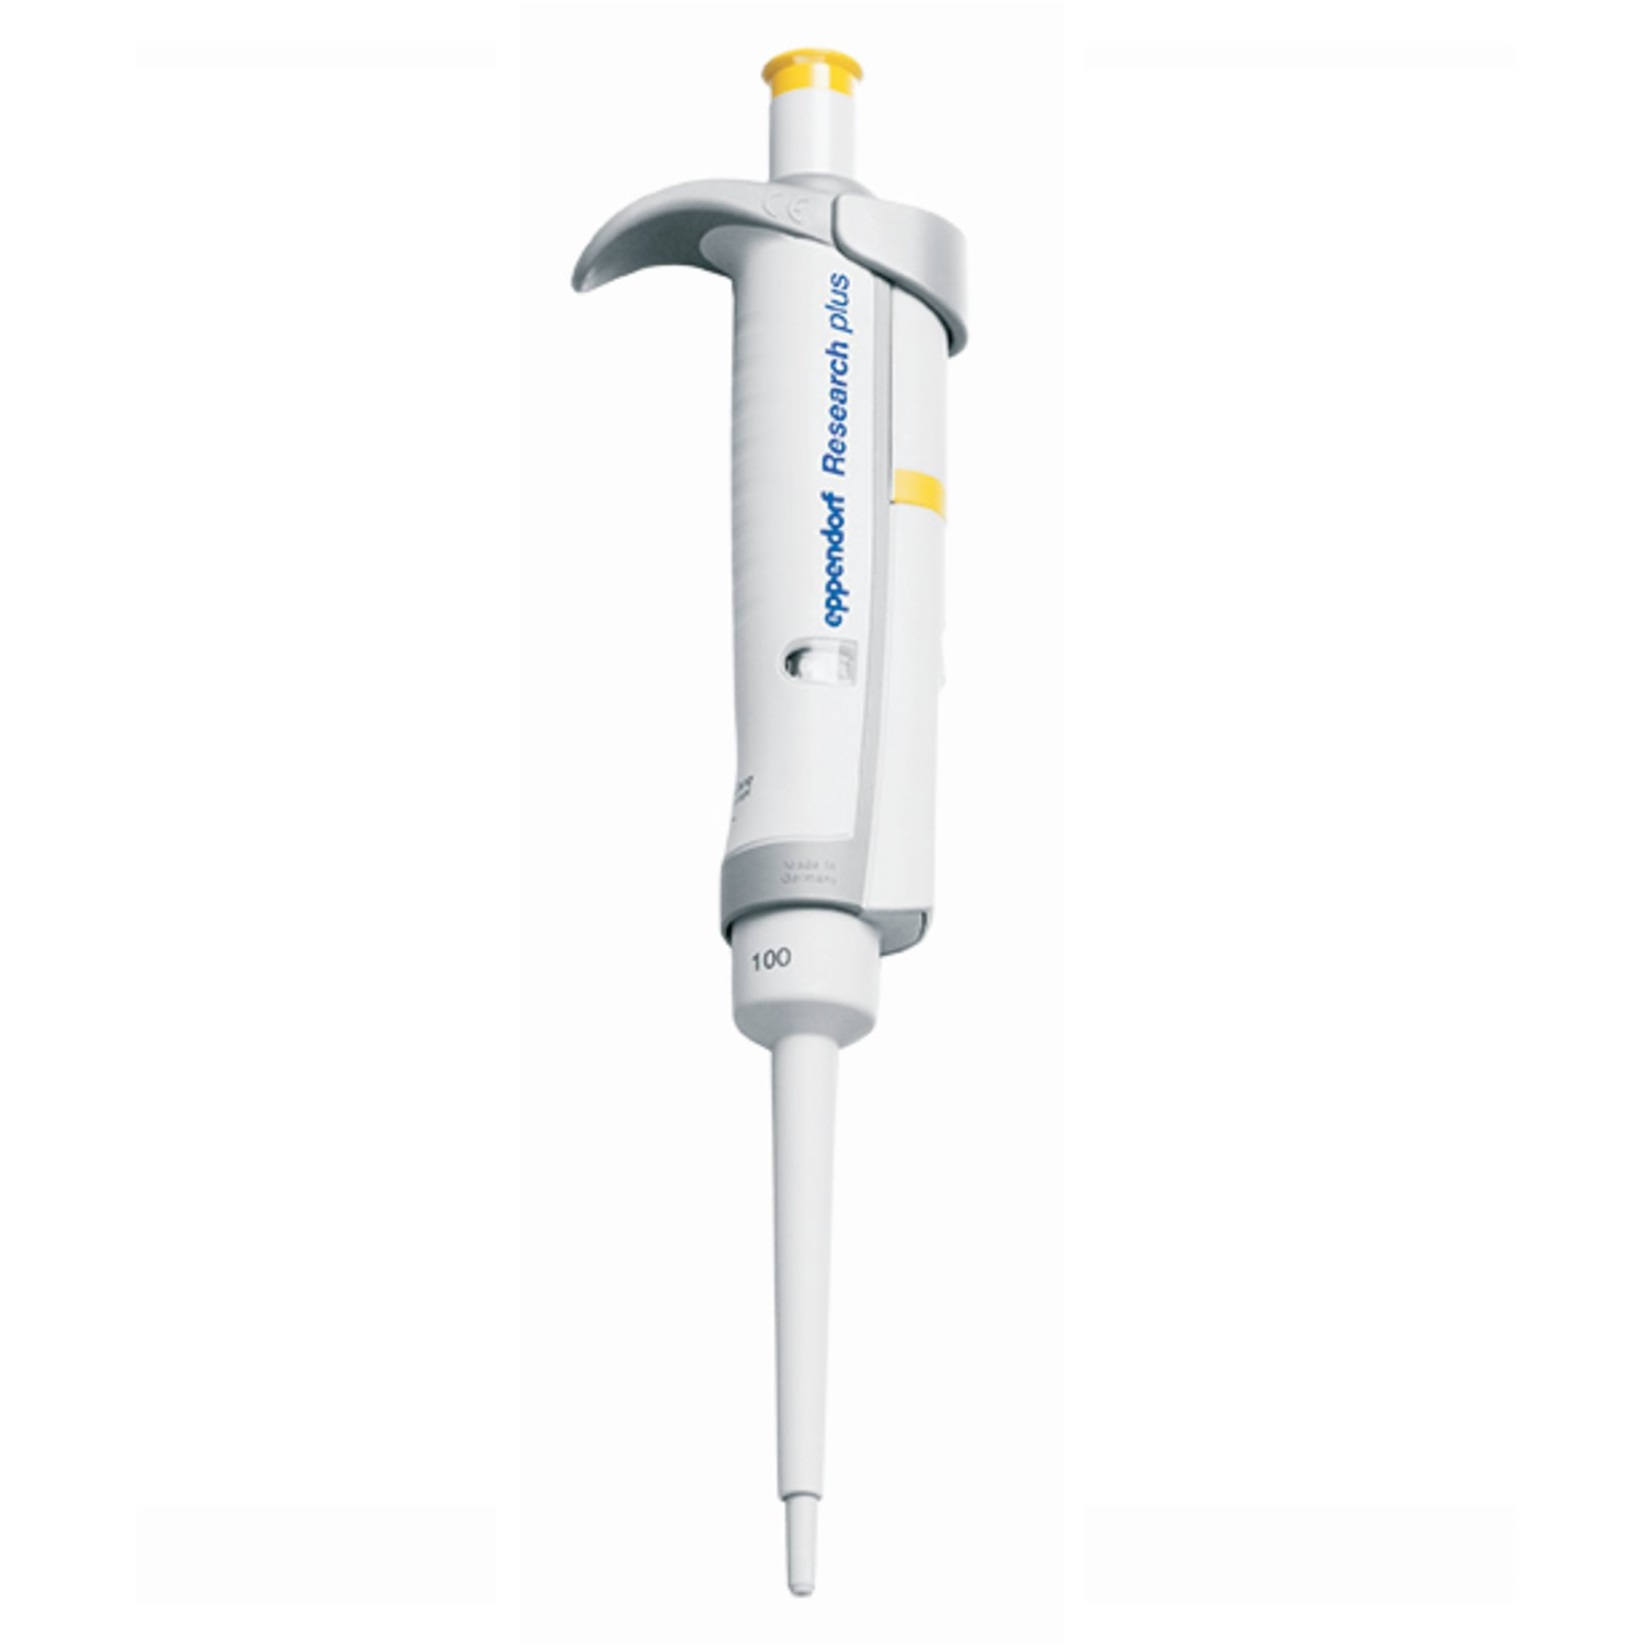 0.5 to 10µl Grey Operating Button Volume Range Eppendorf 3120000020 Single-Channel Research Plus Adjustable-Volume Pipetters